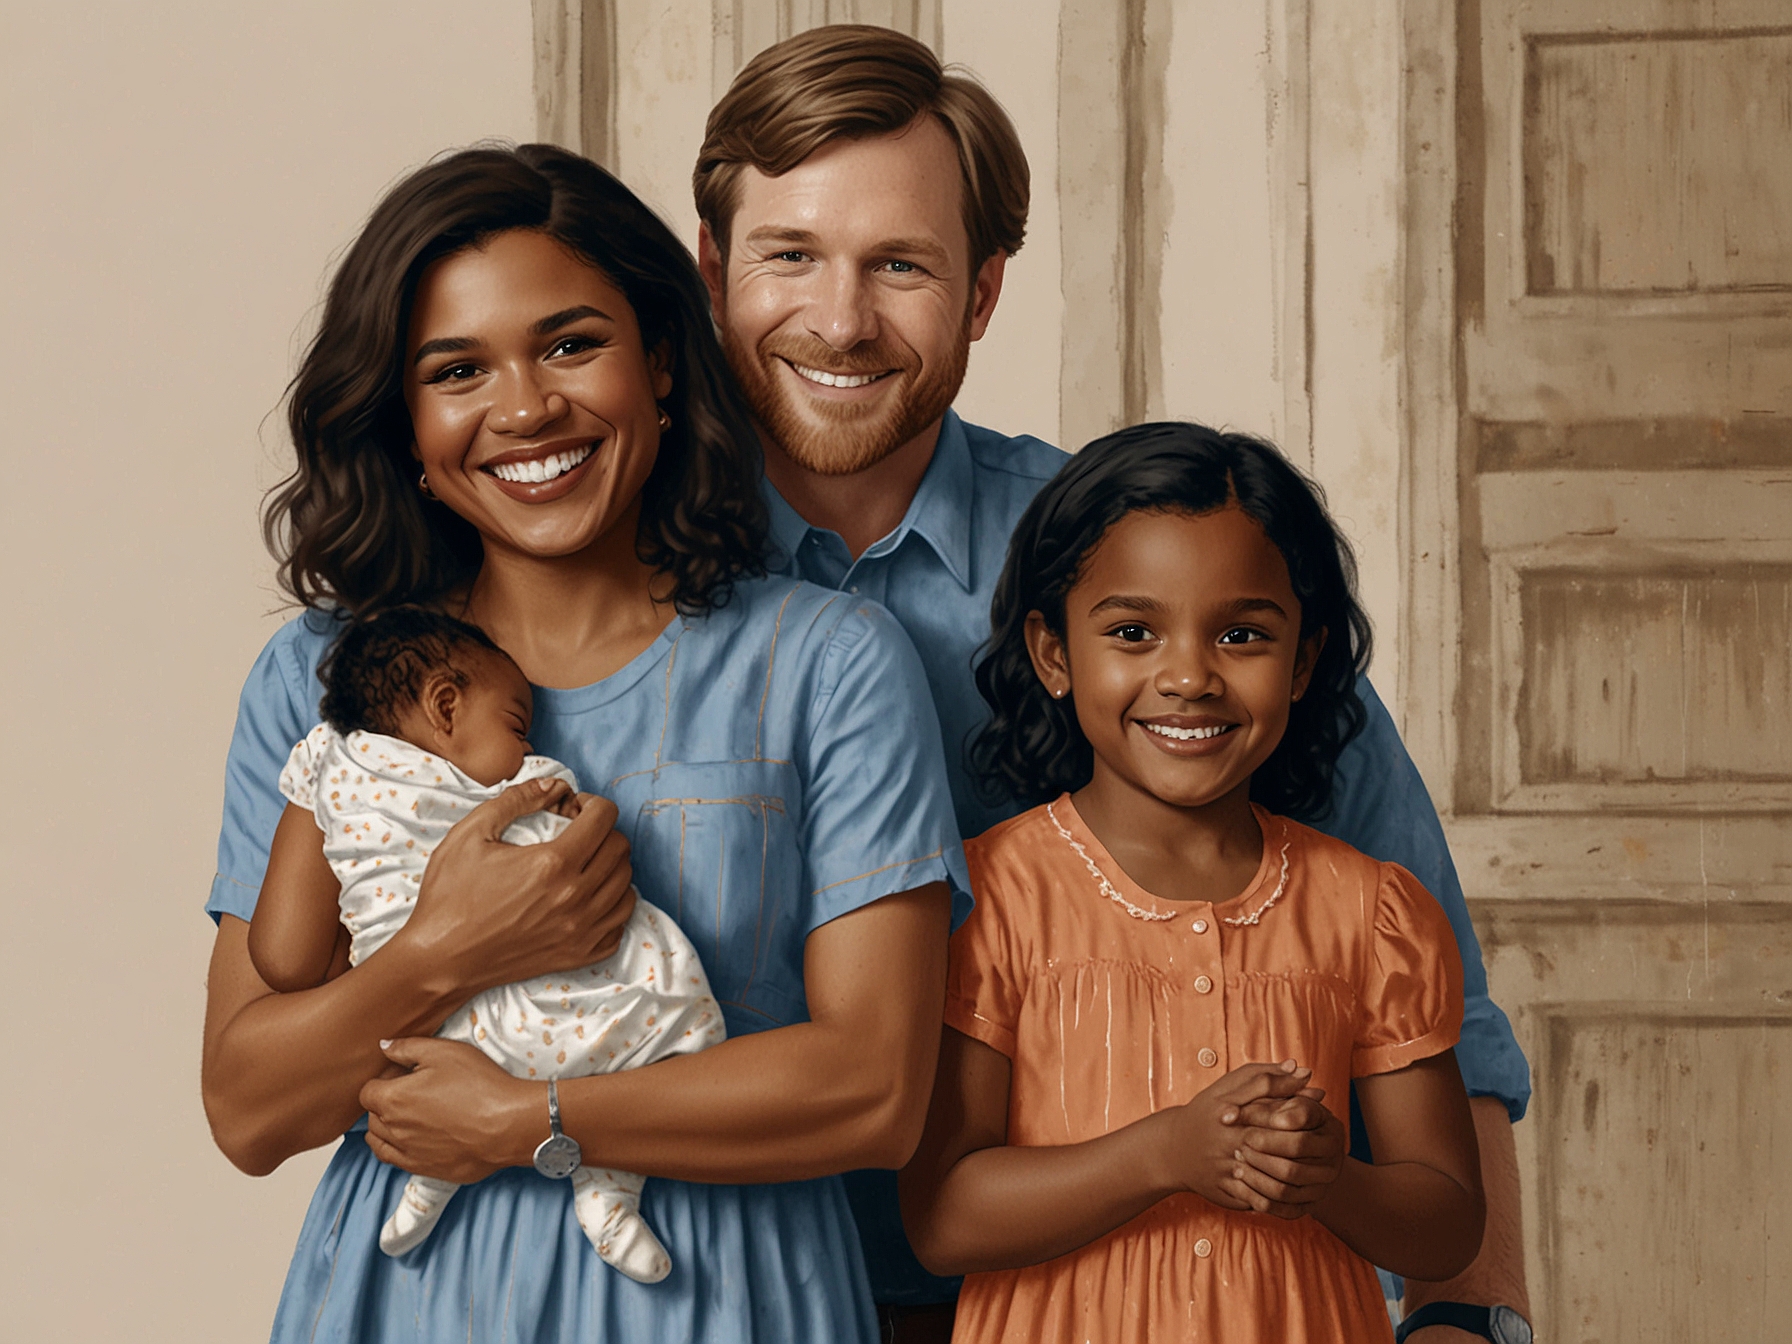 A heartwarming family moment captured: Katherine gently cradles her baby sister Anne, while Spencer looks on with a wide grin. Mindy Kaling stands behind them, beaming with pride and joy.